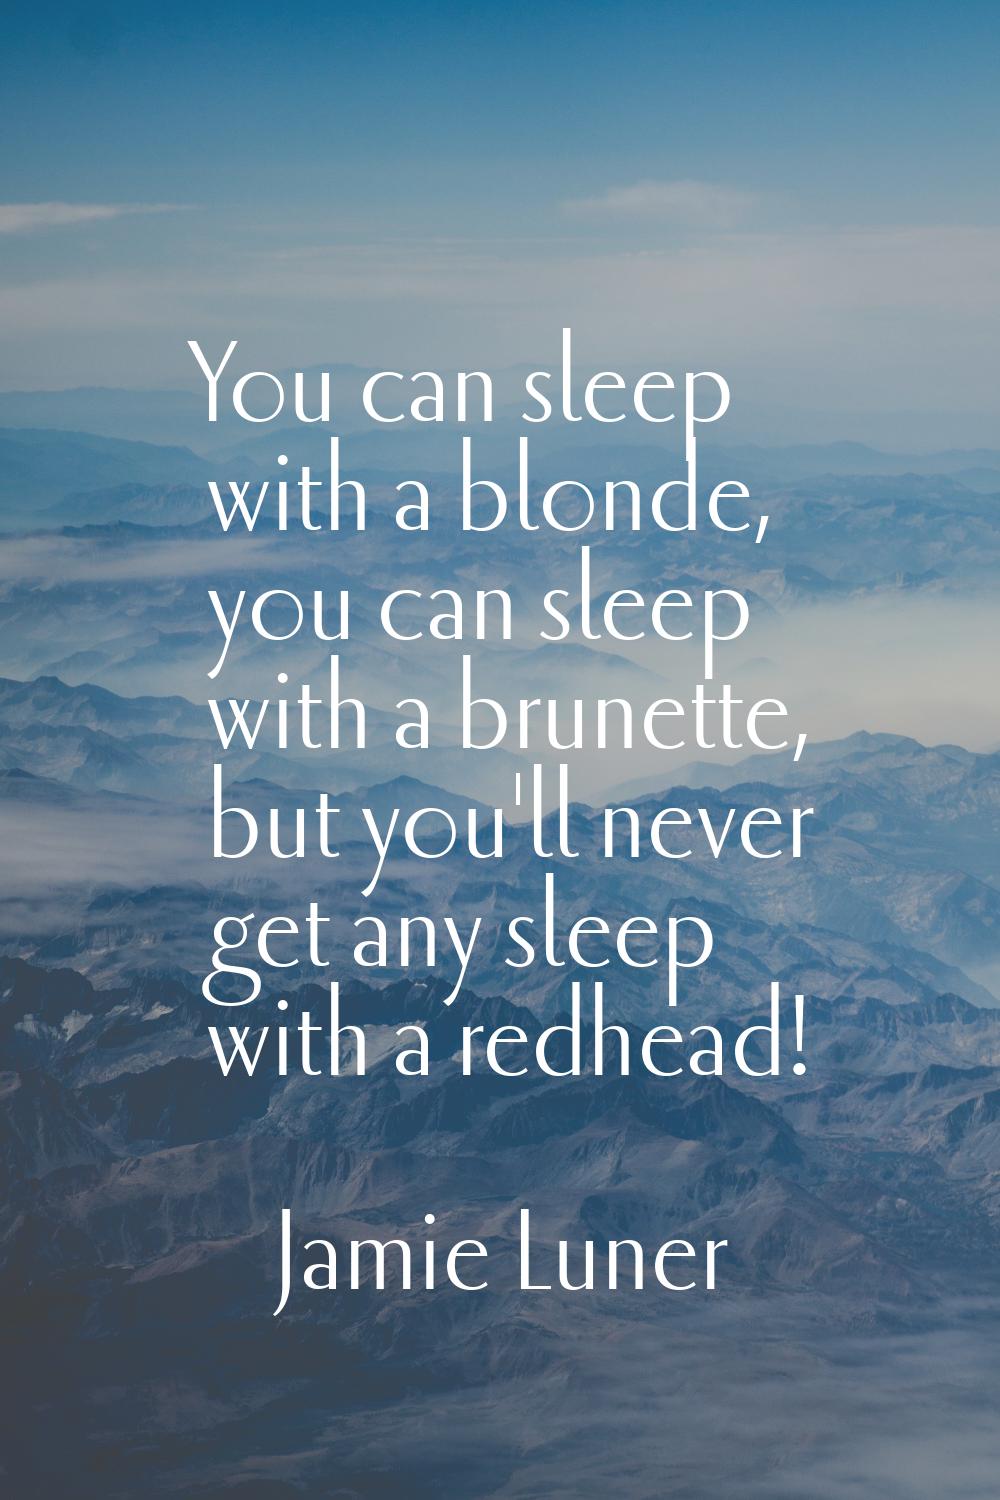 You can sleep with a blonde, you can sleep with a brunette, but you'll never get any sleep with a r